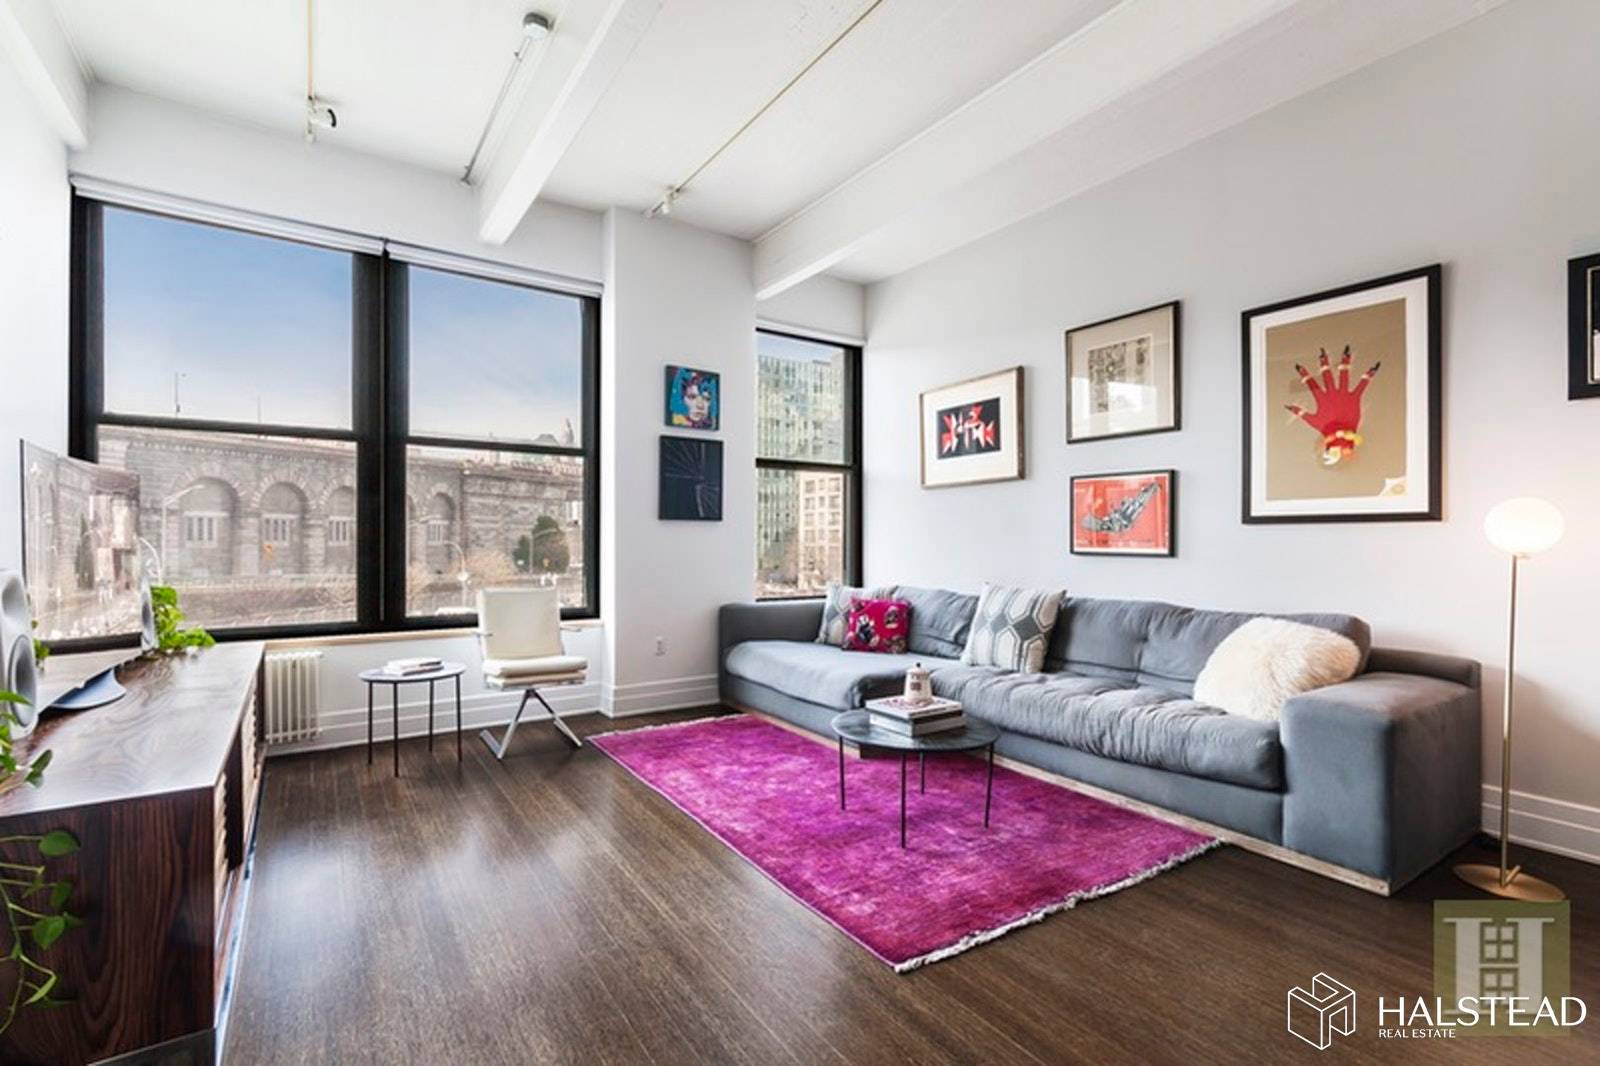 No Fee ! South west facing loft in 70 Washington St, one of Dumbo's most coveted condominiums.